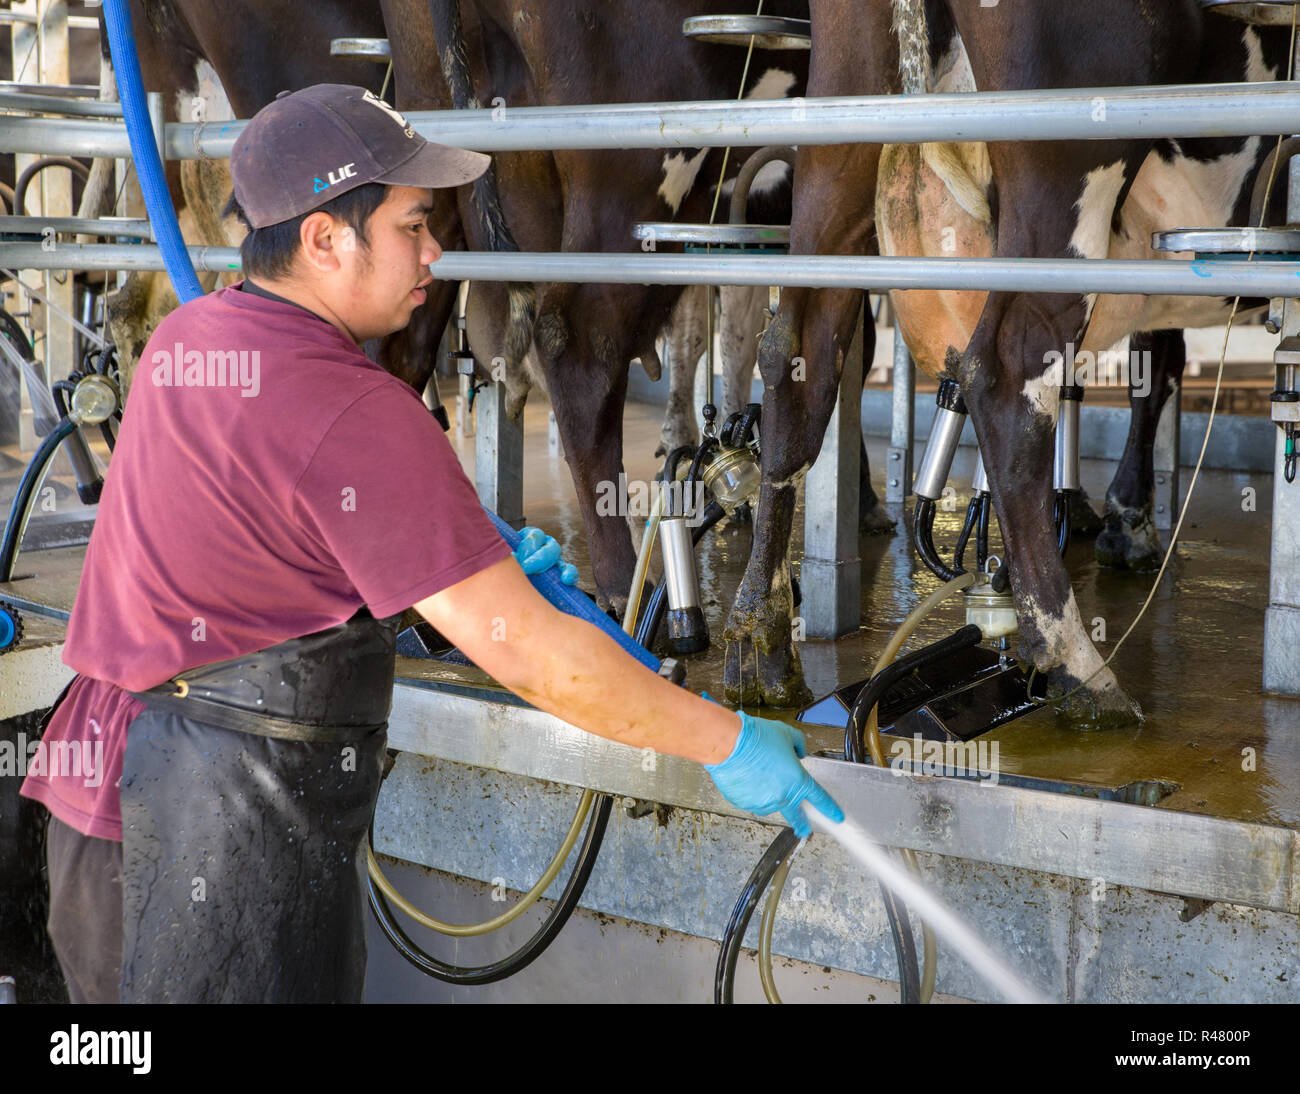 Sheffield, New Zealand - August 03 2018: a farm worker hoses cow effluent from the milking area in a dairy shed Stock Photo